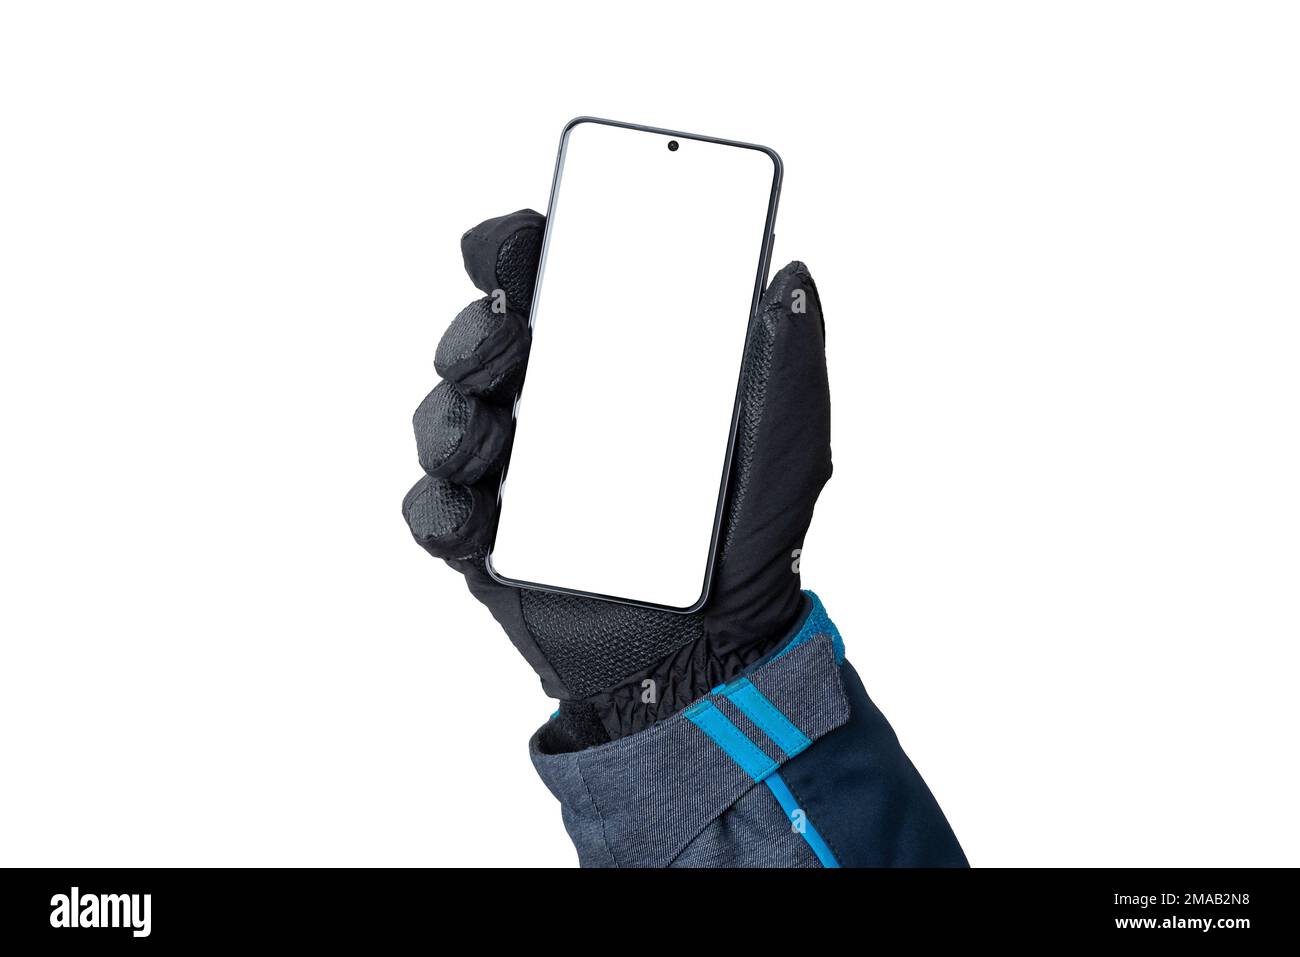 Hand with a winter glove shows a mobile phone. Isolated background and display for mockup, app presentation and winter environment Stock Photo